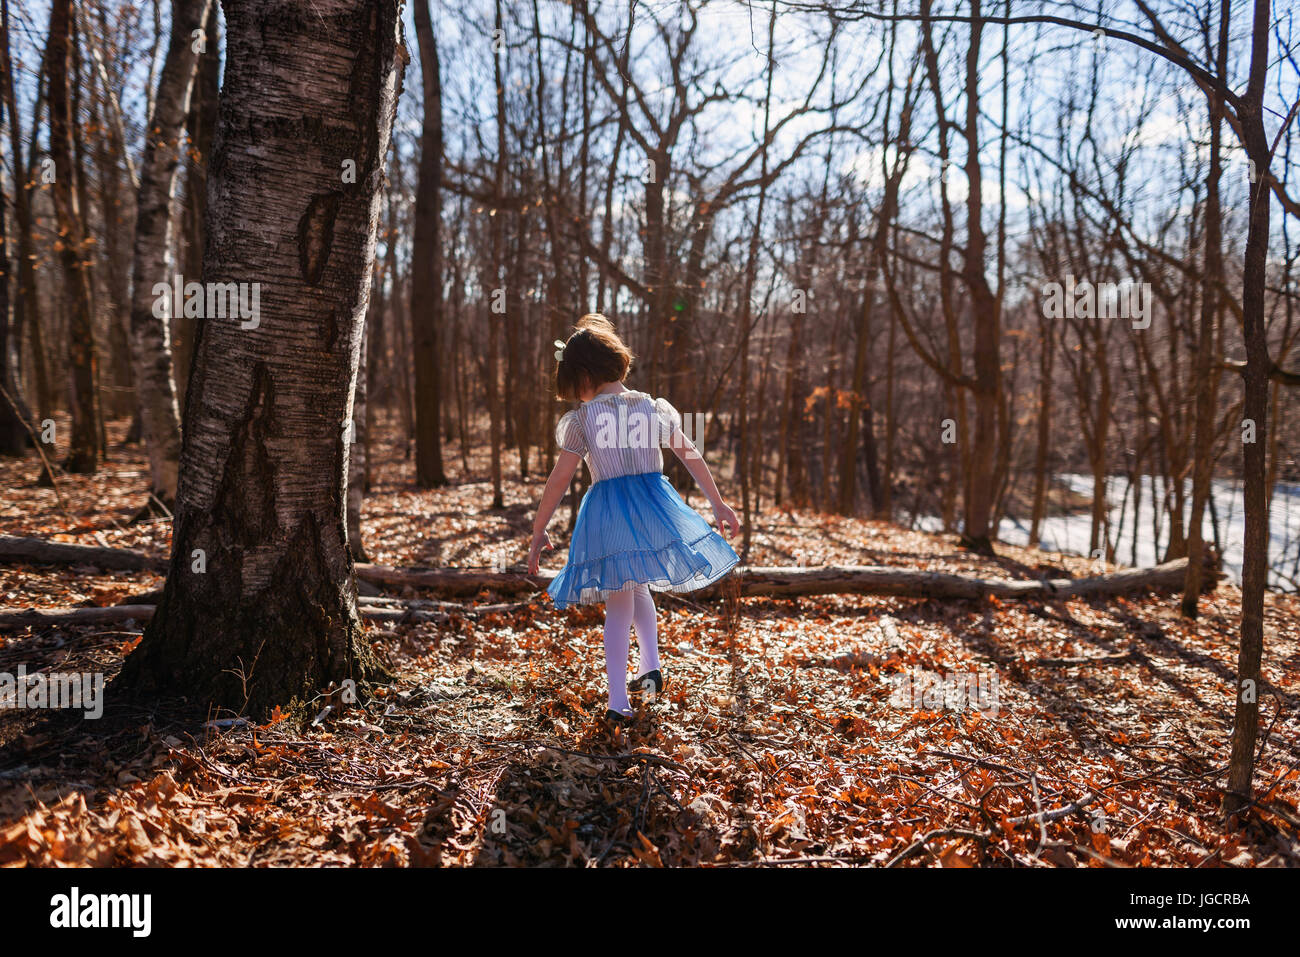 Girl in a dress walking through forest Stock Photo